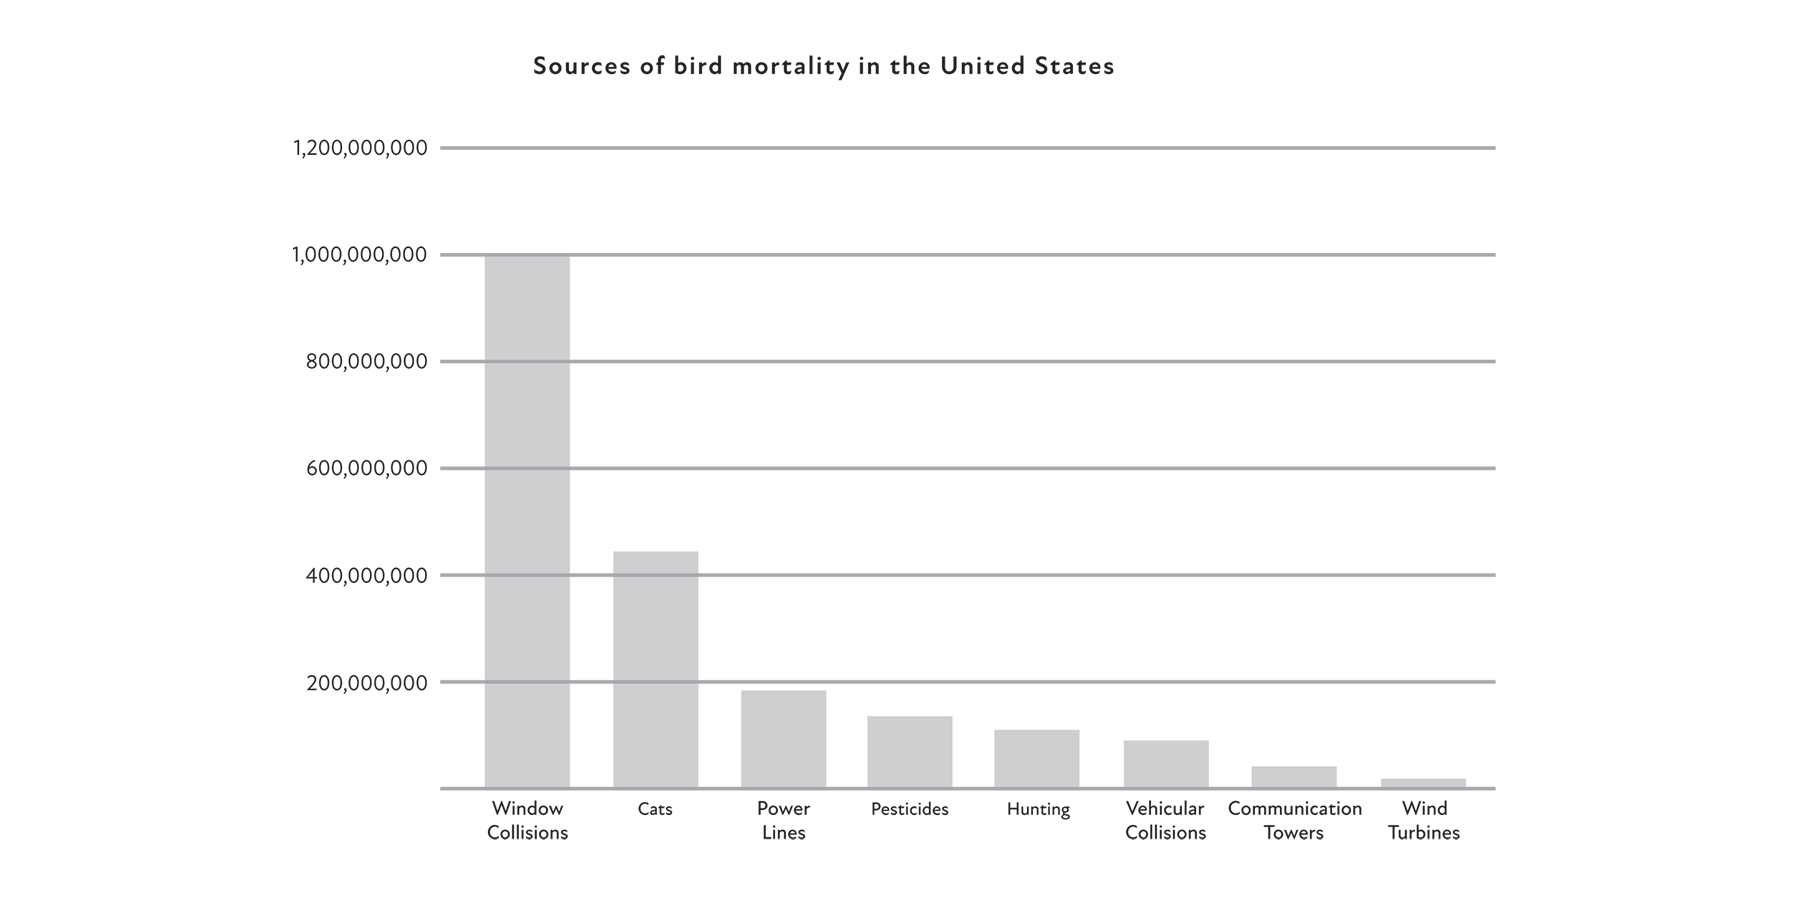 Chart showing sources of bird mortality in the United States.